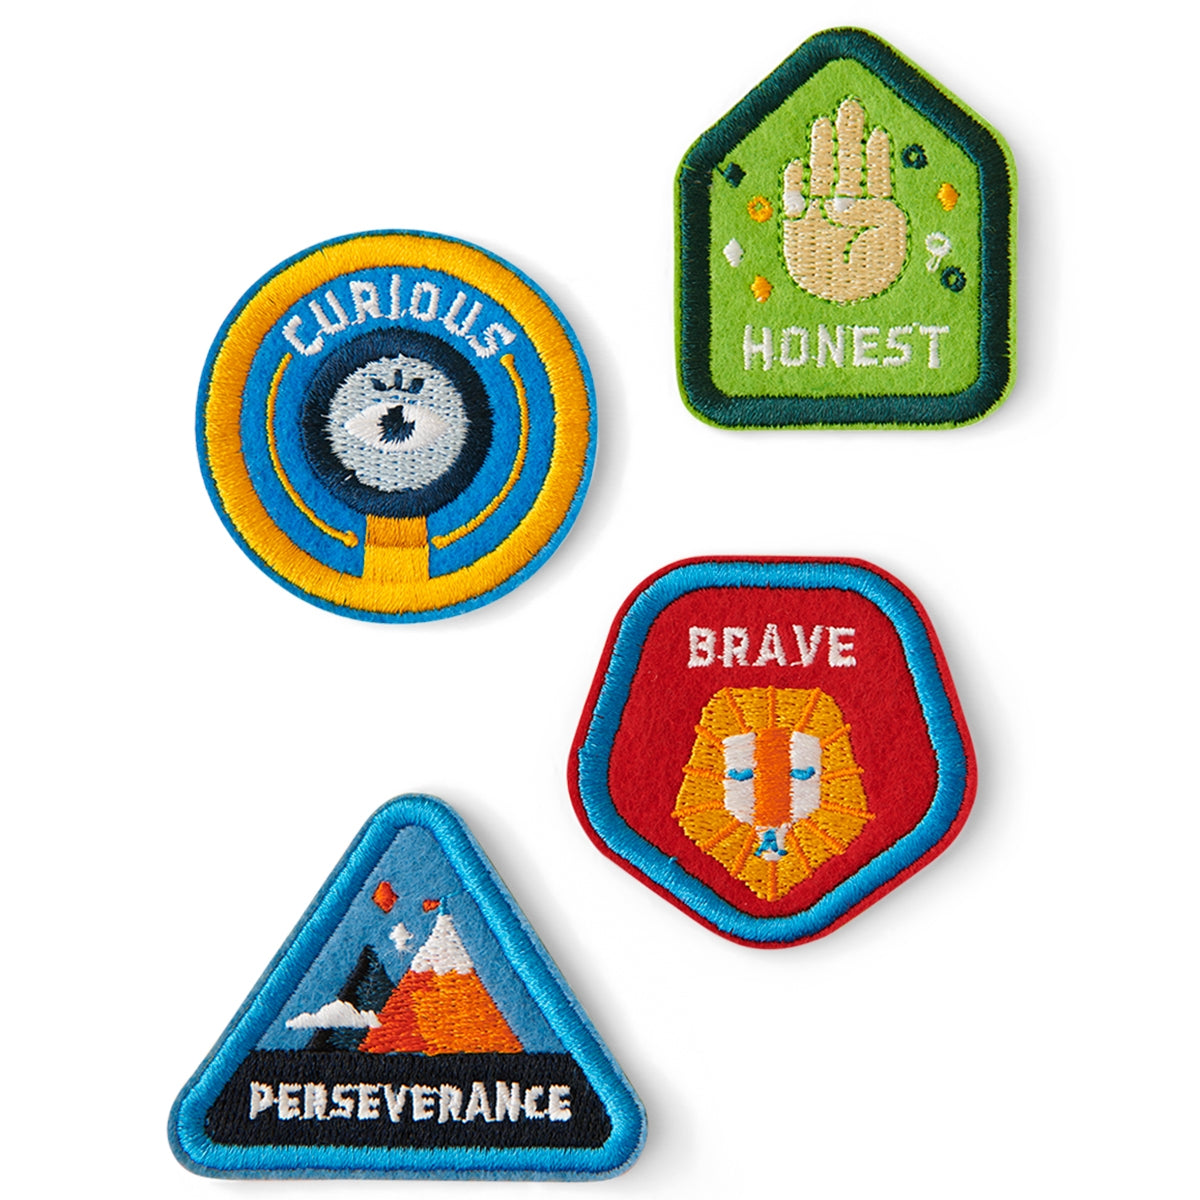 Set of 4 Character Badge Patches featuring the traits Curious, Honest, Brave, and Perseverance, designed for children and ideal for backpacks or clothing. Adhesive and iron-on backing for easy application.